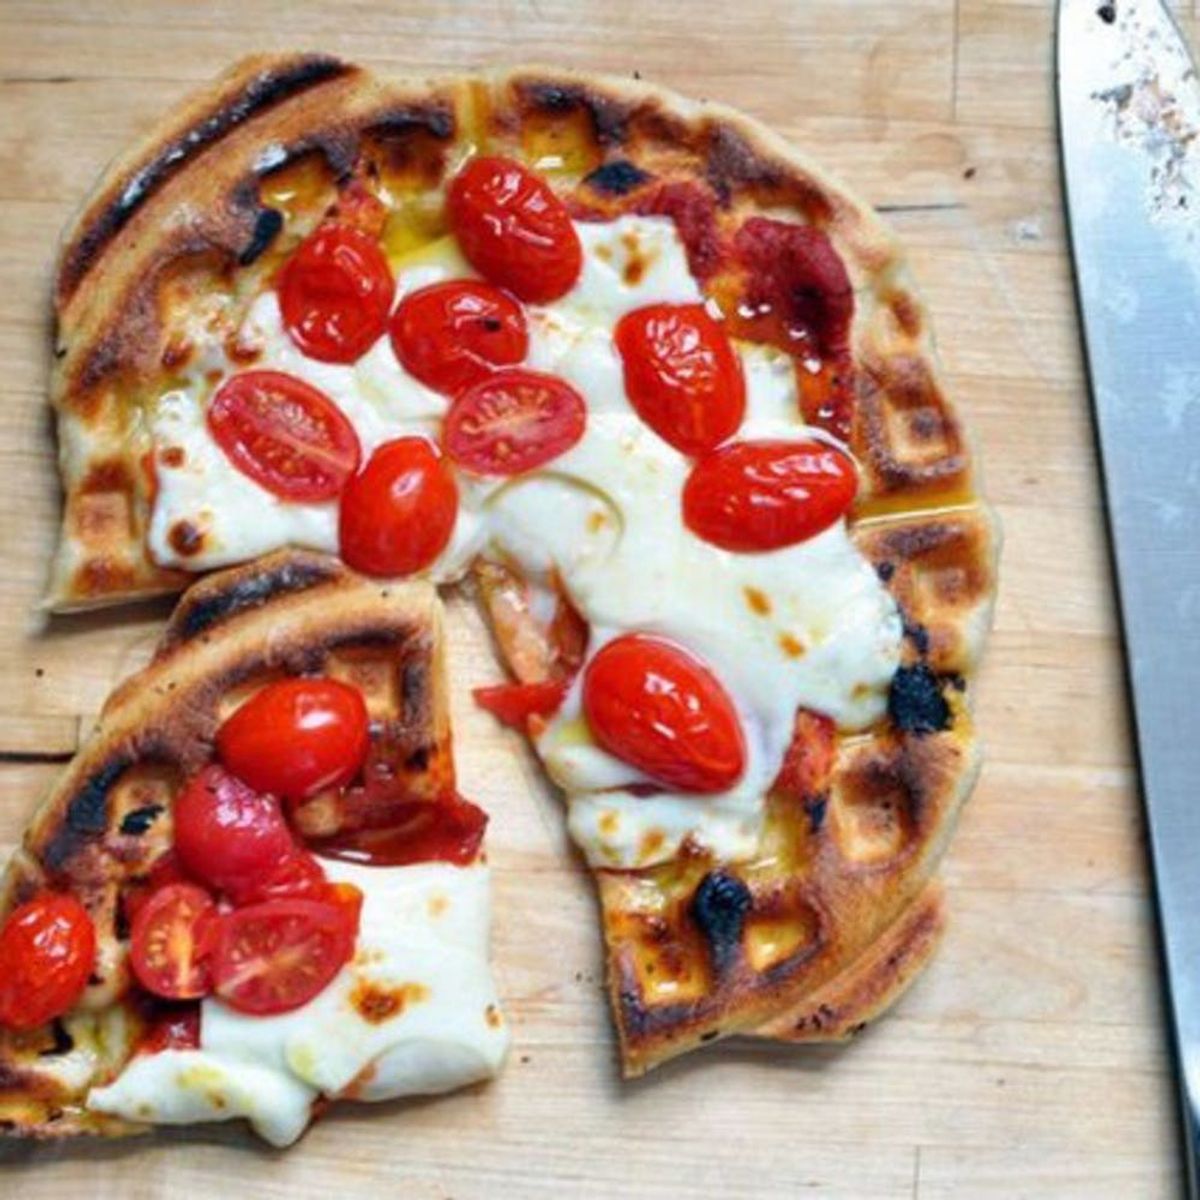 Bet You’ve Never Used Your Waffle Iron for These 15 Crazy Recipes Before